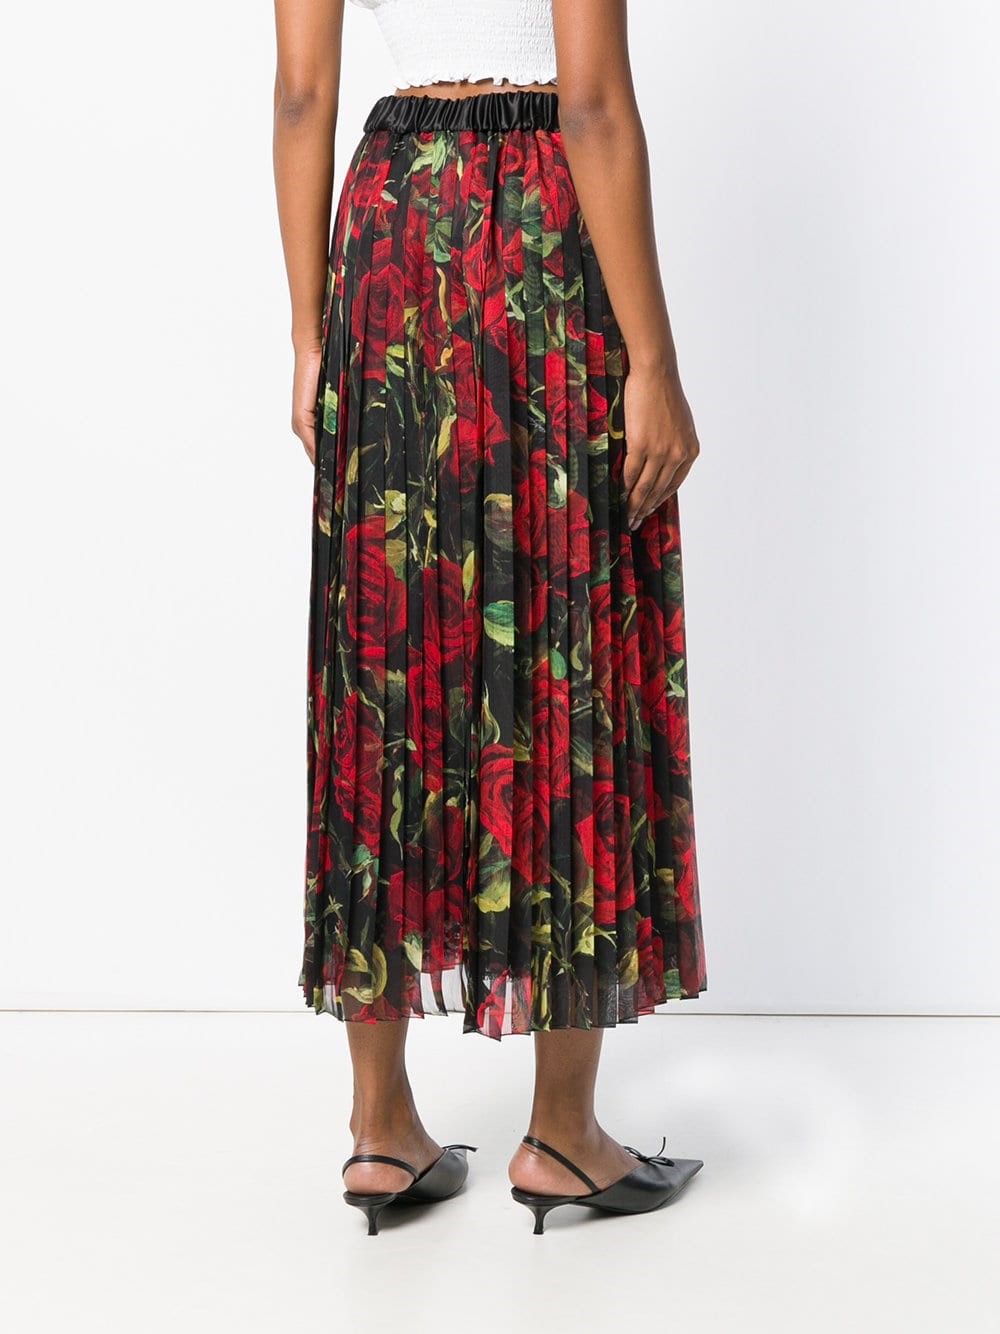 dolce & gabbana ROSE PRINT SKIRT available on montiboutique.com - 23461